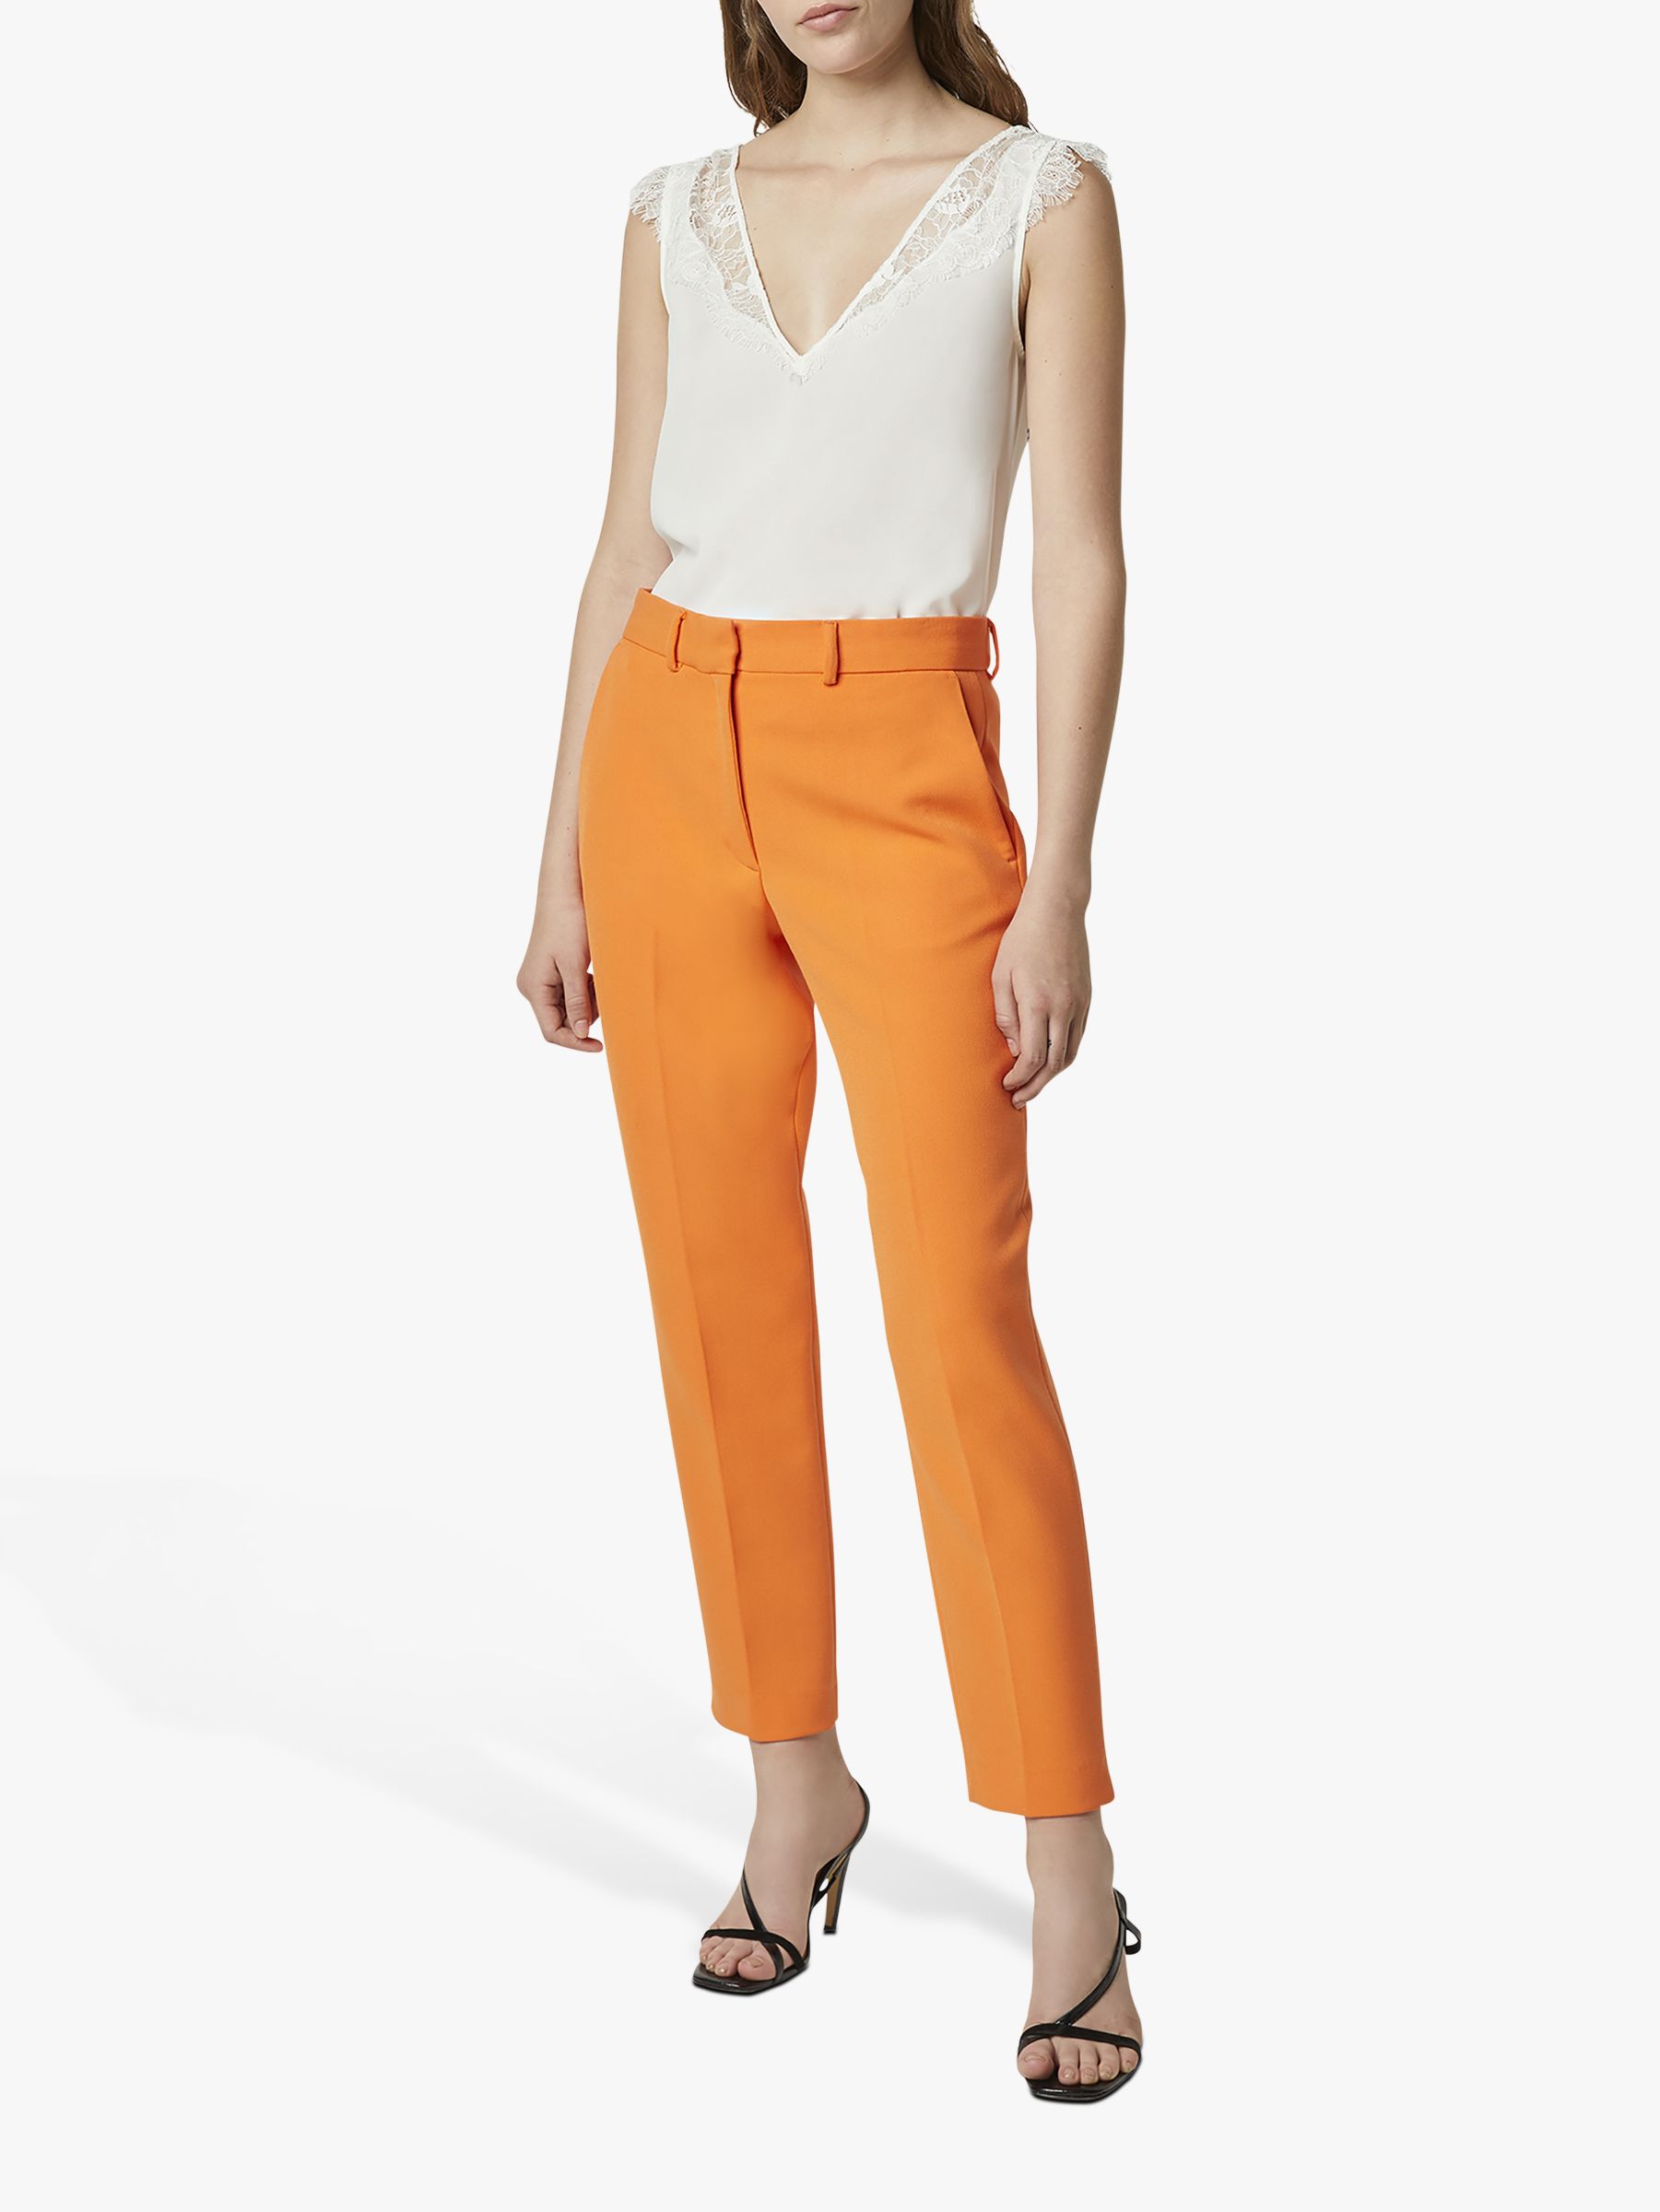 French Connection Adisa Sundae Tailored Trousers Tangerine Dream At John Lewis Partners